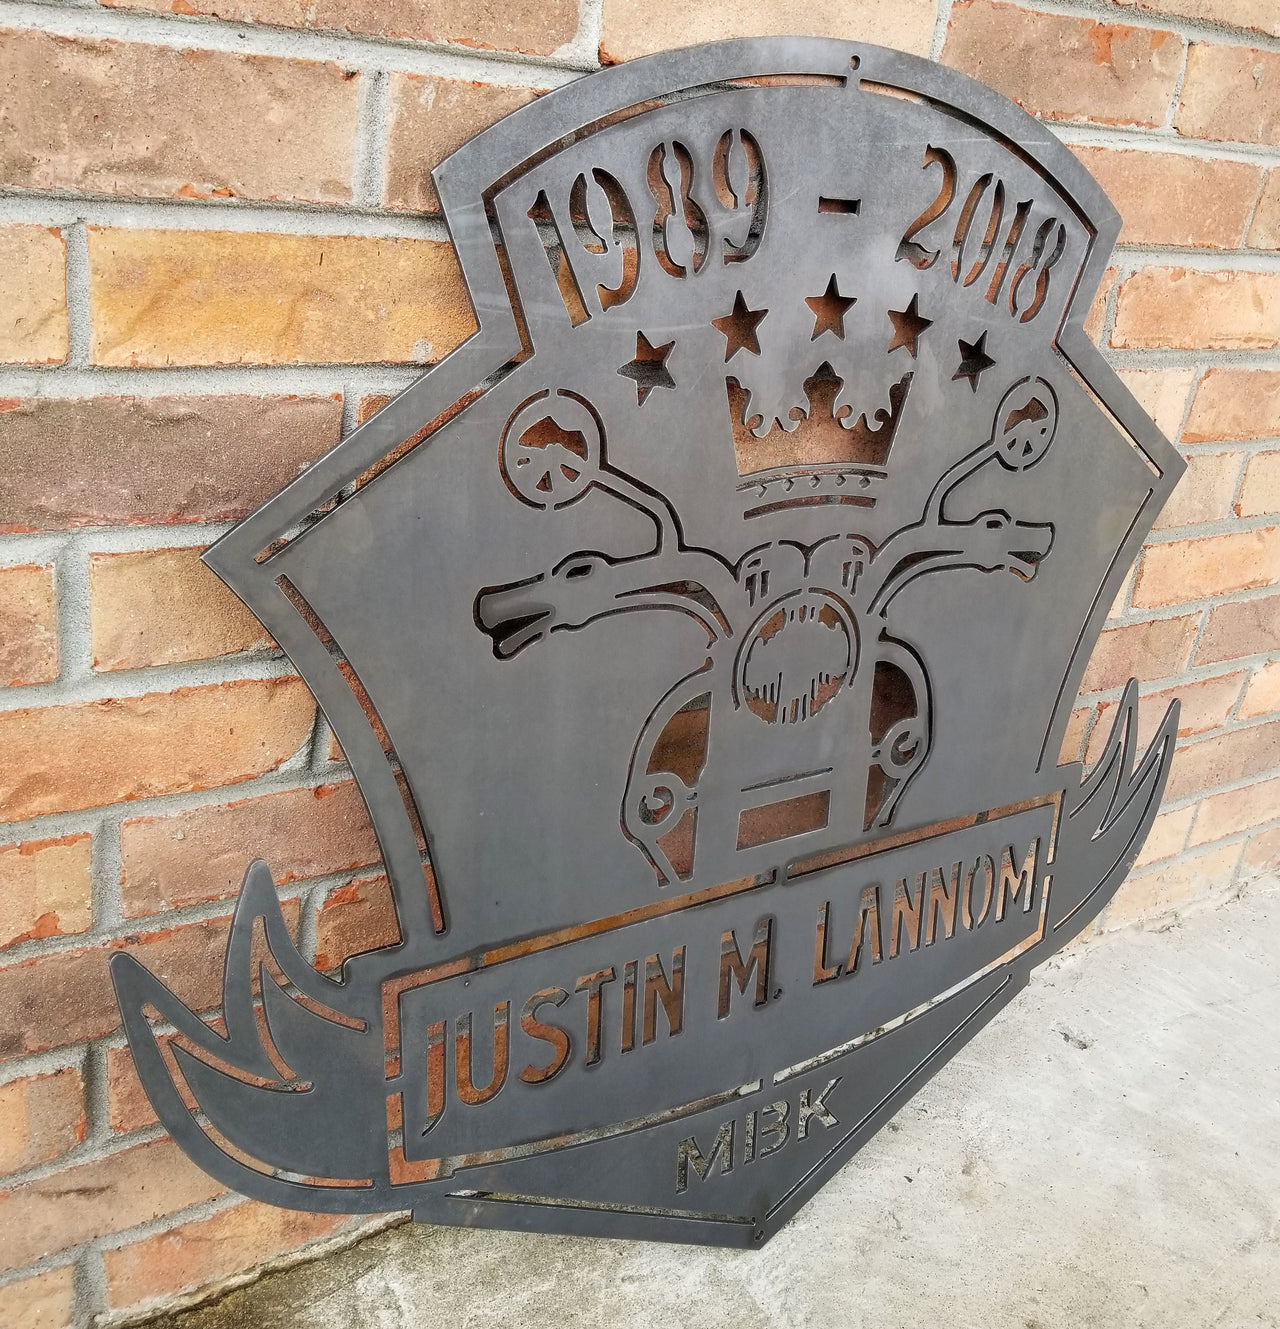 This is a memorial sign with an established year, dipicting an image of a motorcylce.  The bottom has a name and reads, "Justin M. Lannom".